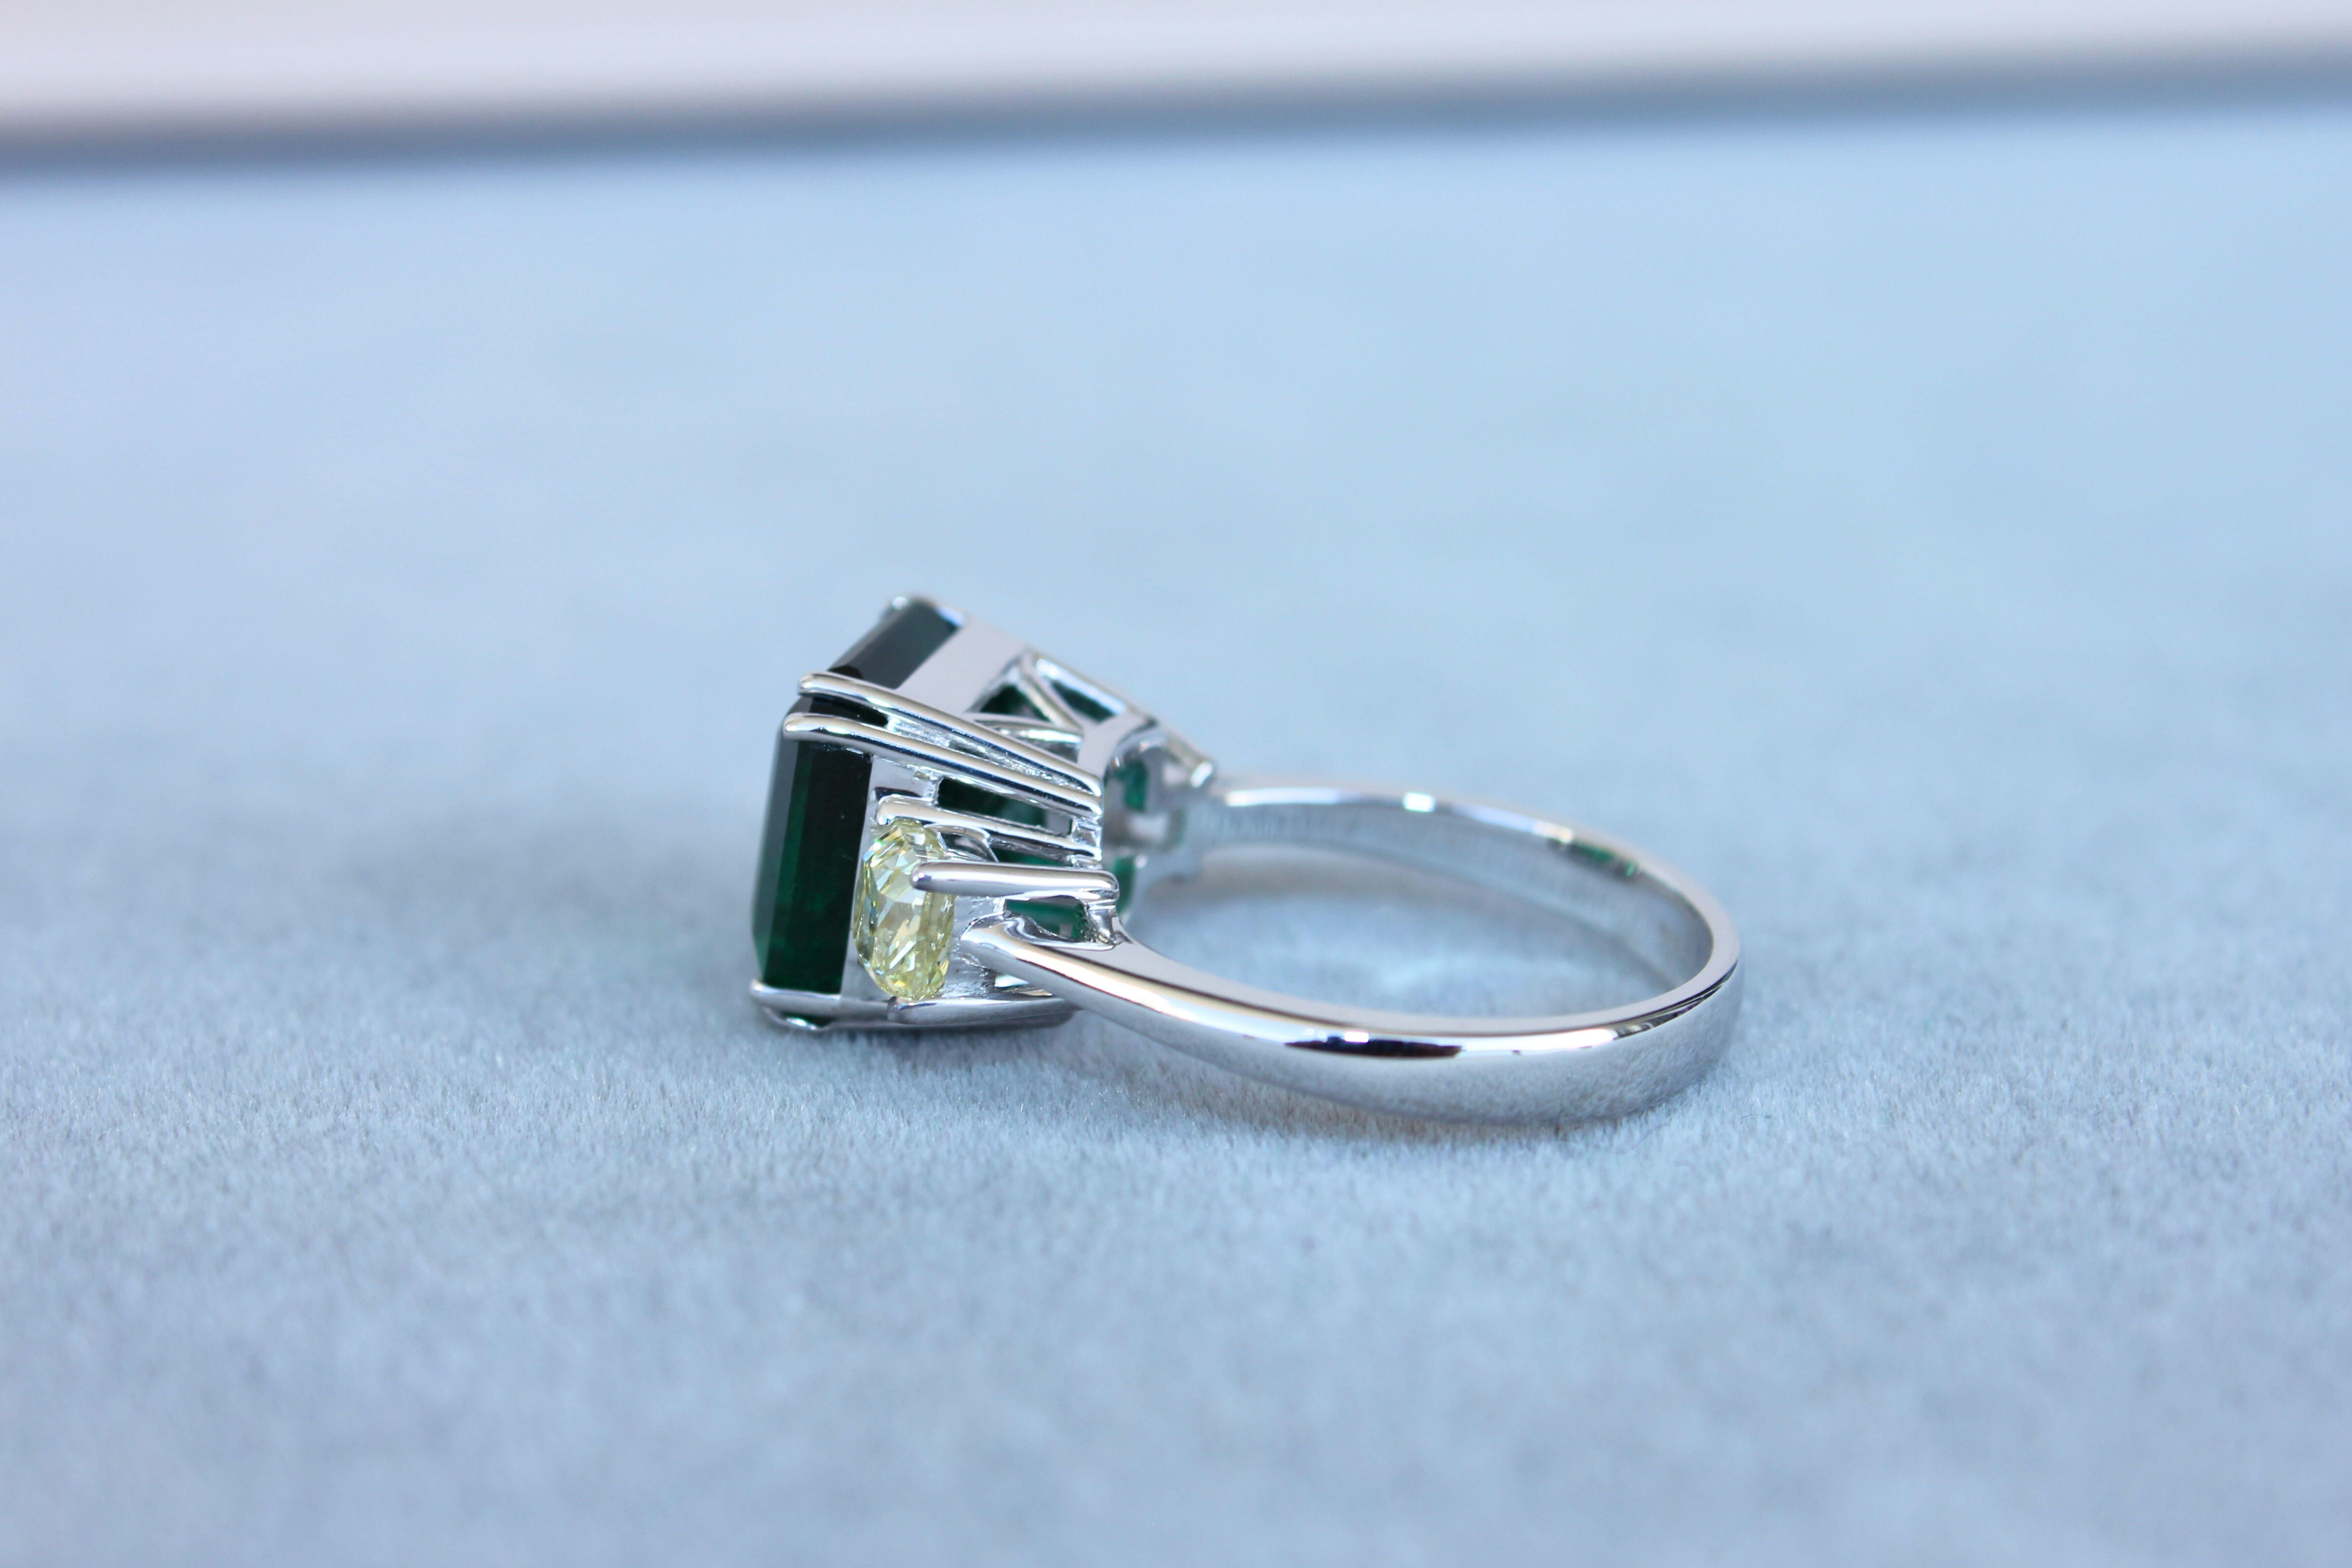 Square Cut Emerald Yellow Cushion Shape Diamonds Two Stone 18K White Gold Ring For Sale 1